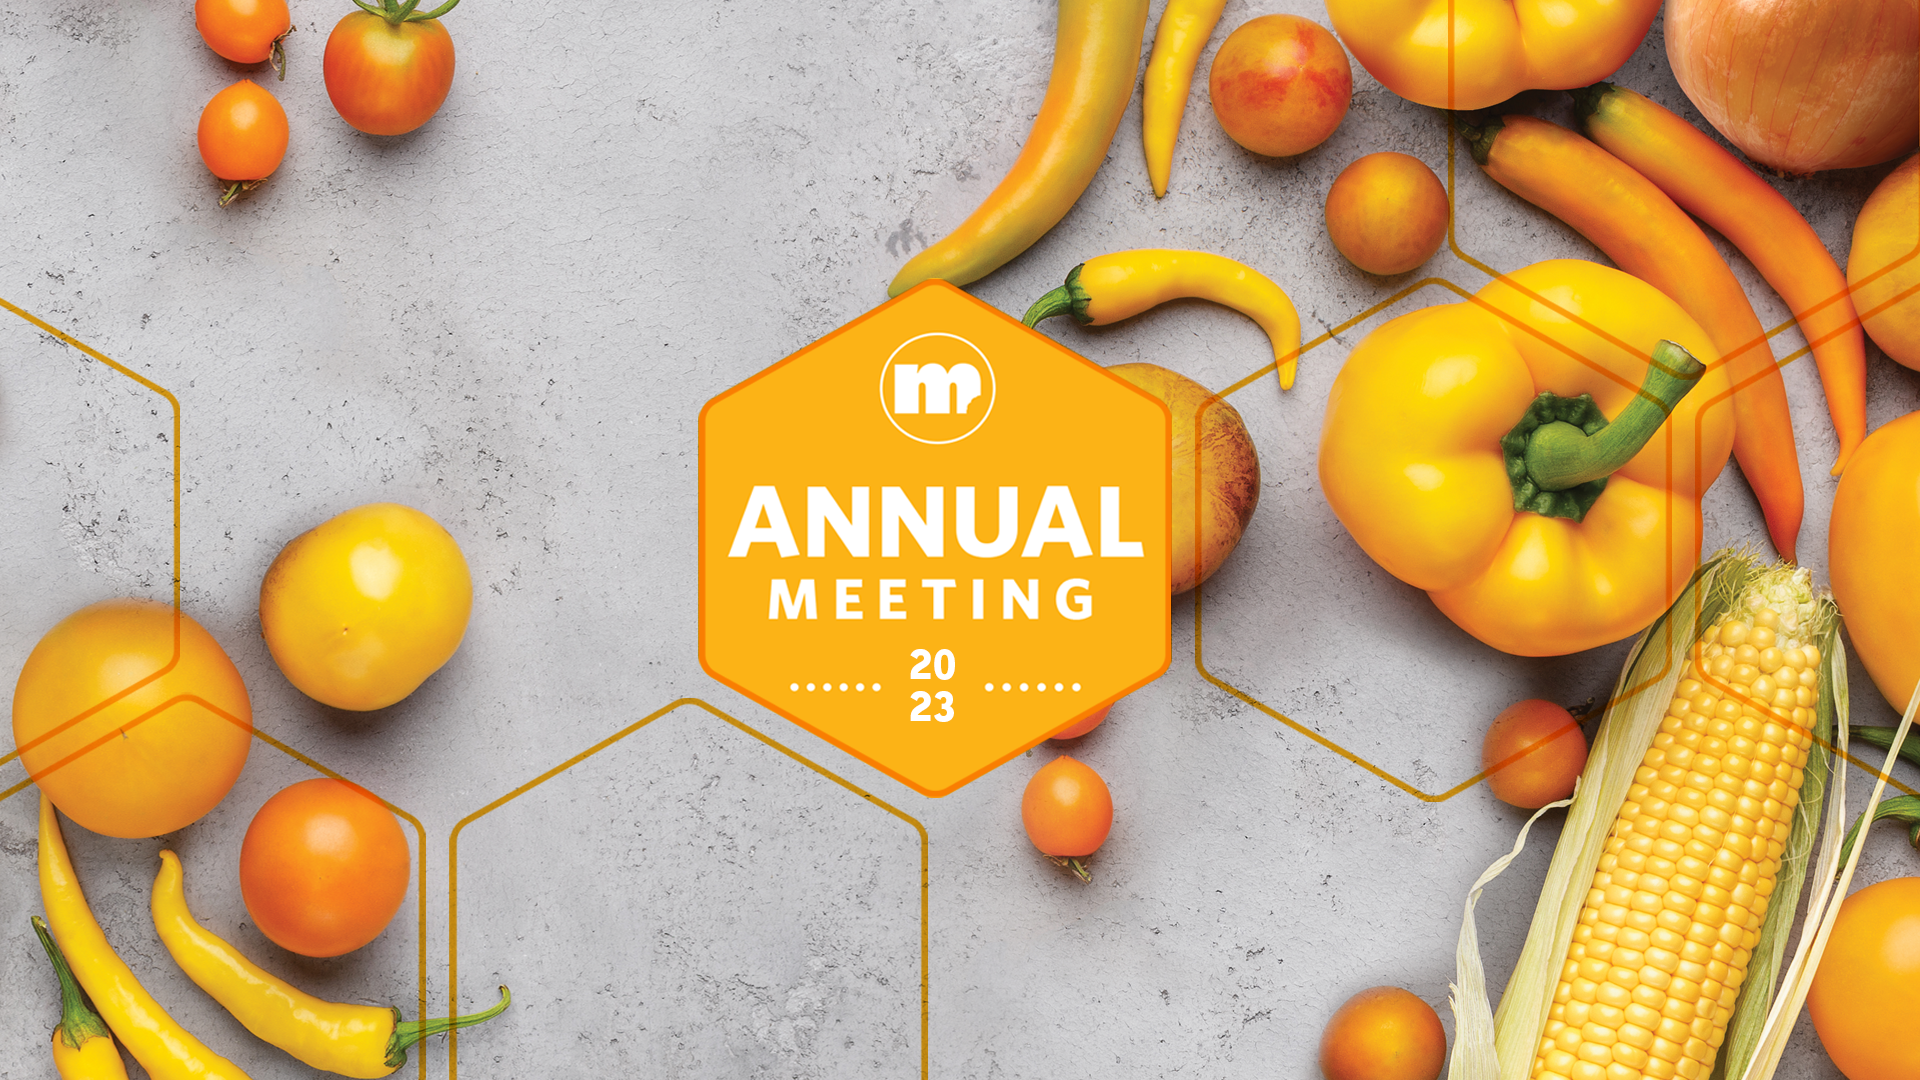 Image for Mississippi Market’s Annual Meeting and Celebration